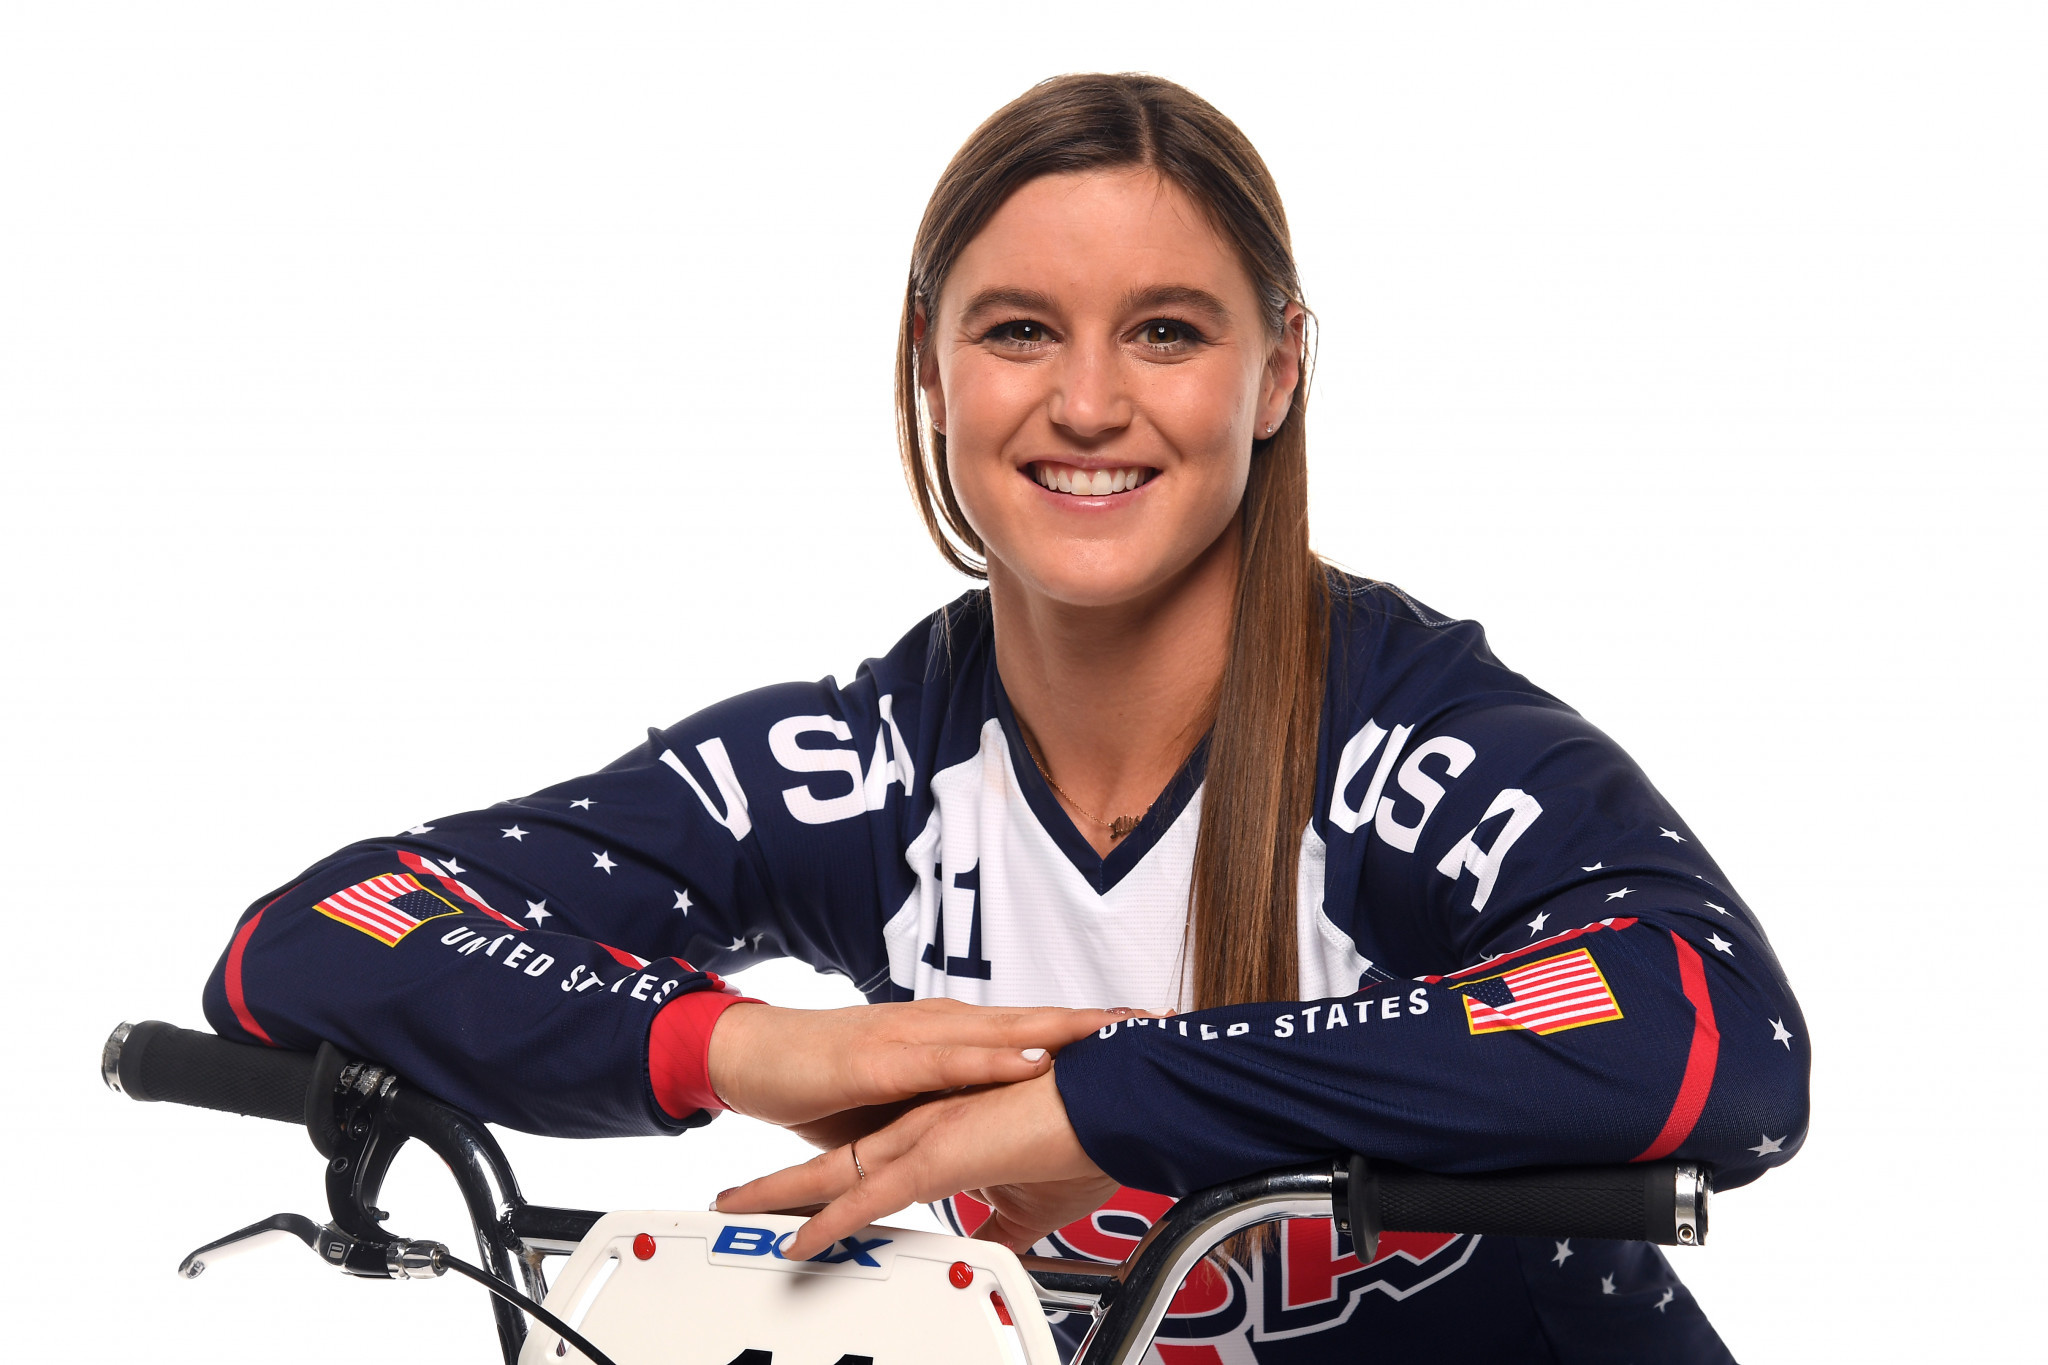 Alise Willoughby of the United States is aiming for a third successive win at the the UCI BMX Supercross World Cup ©Getty Images